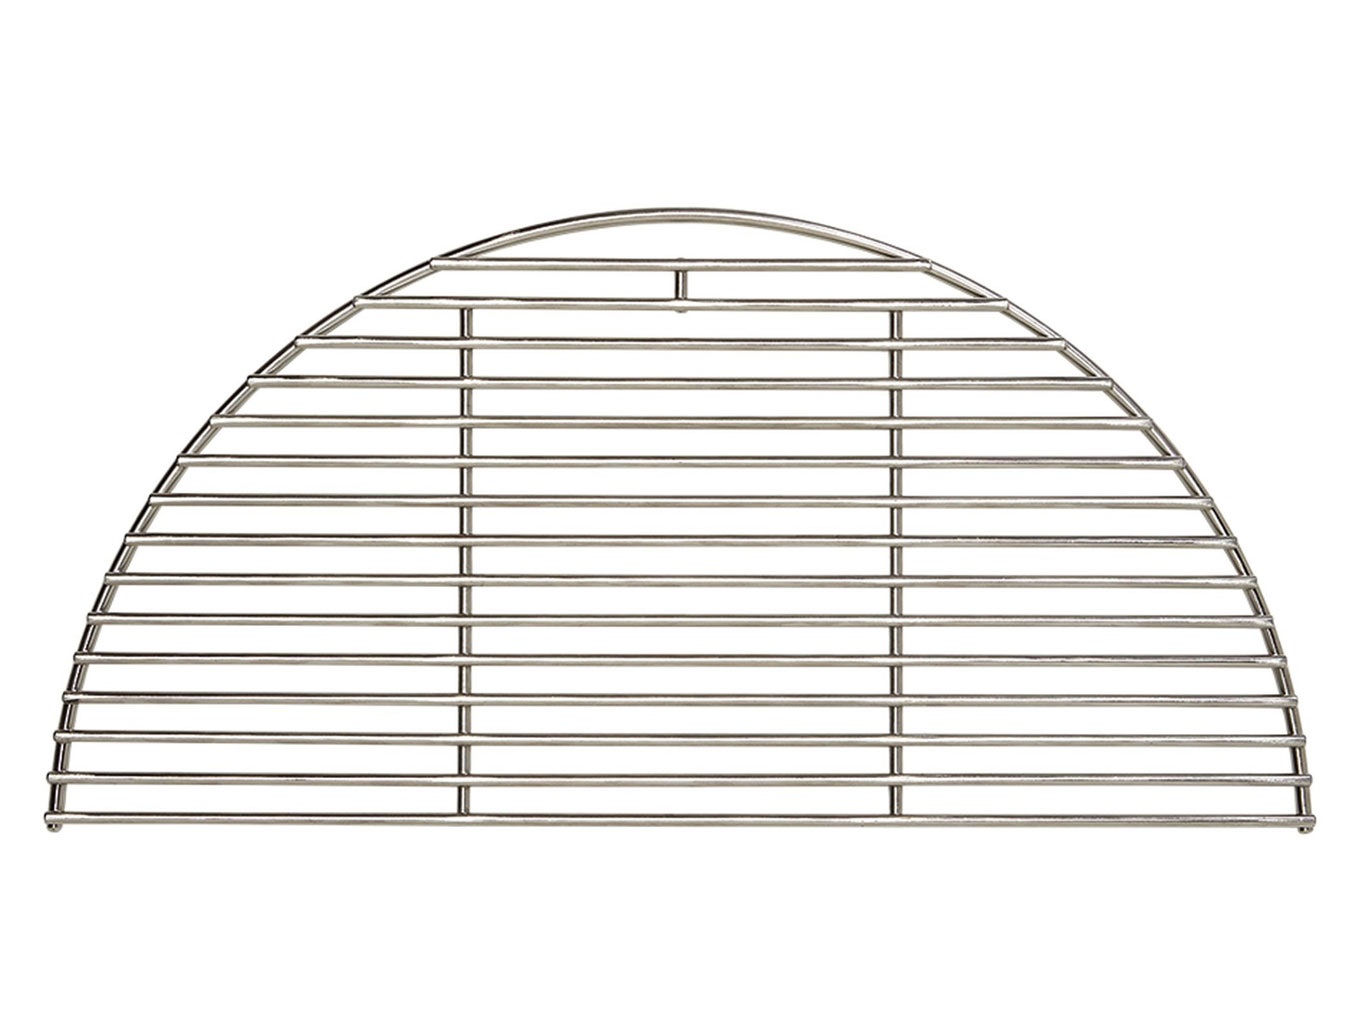 Stainless Steel BBQ Grate For Classic 18" Ceramic Grills sold by Kamado Joe NZ